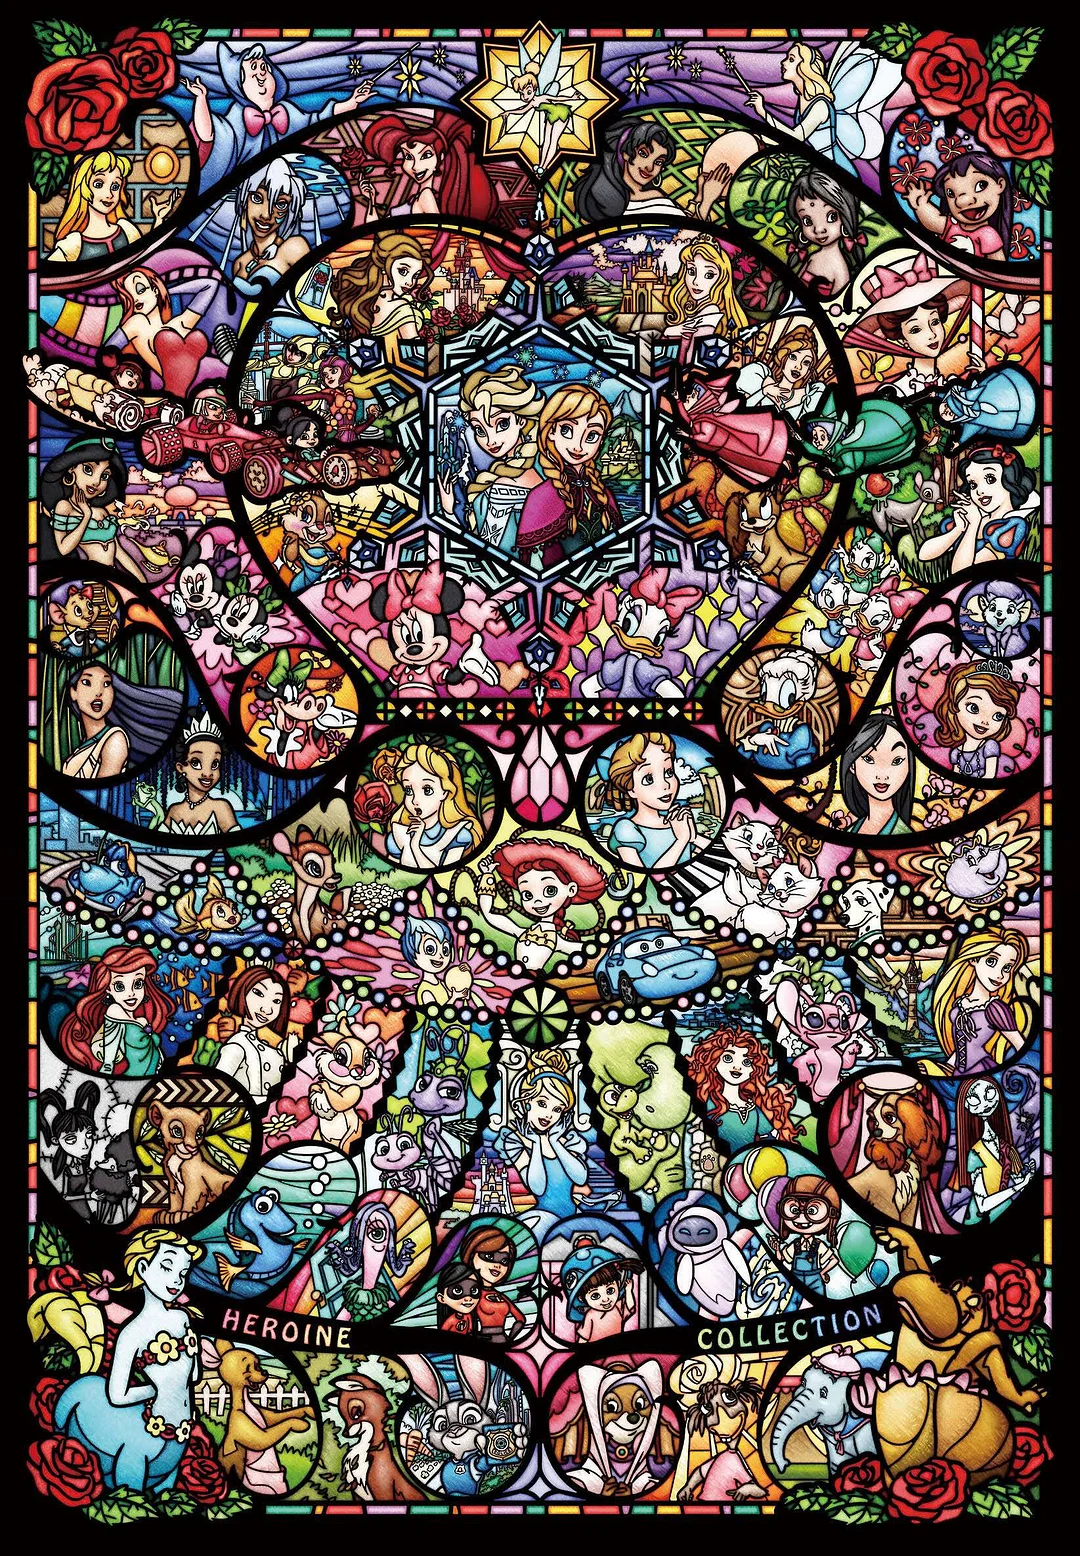 Stained Glass Disney Female Character 90*130cm(canvas) full round